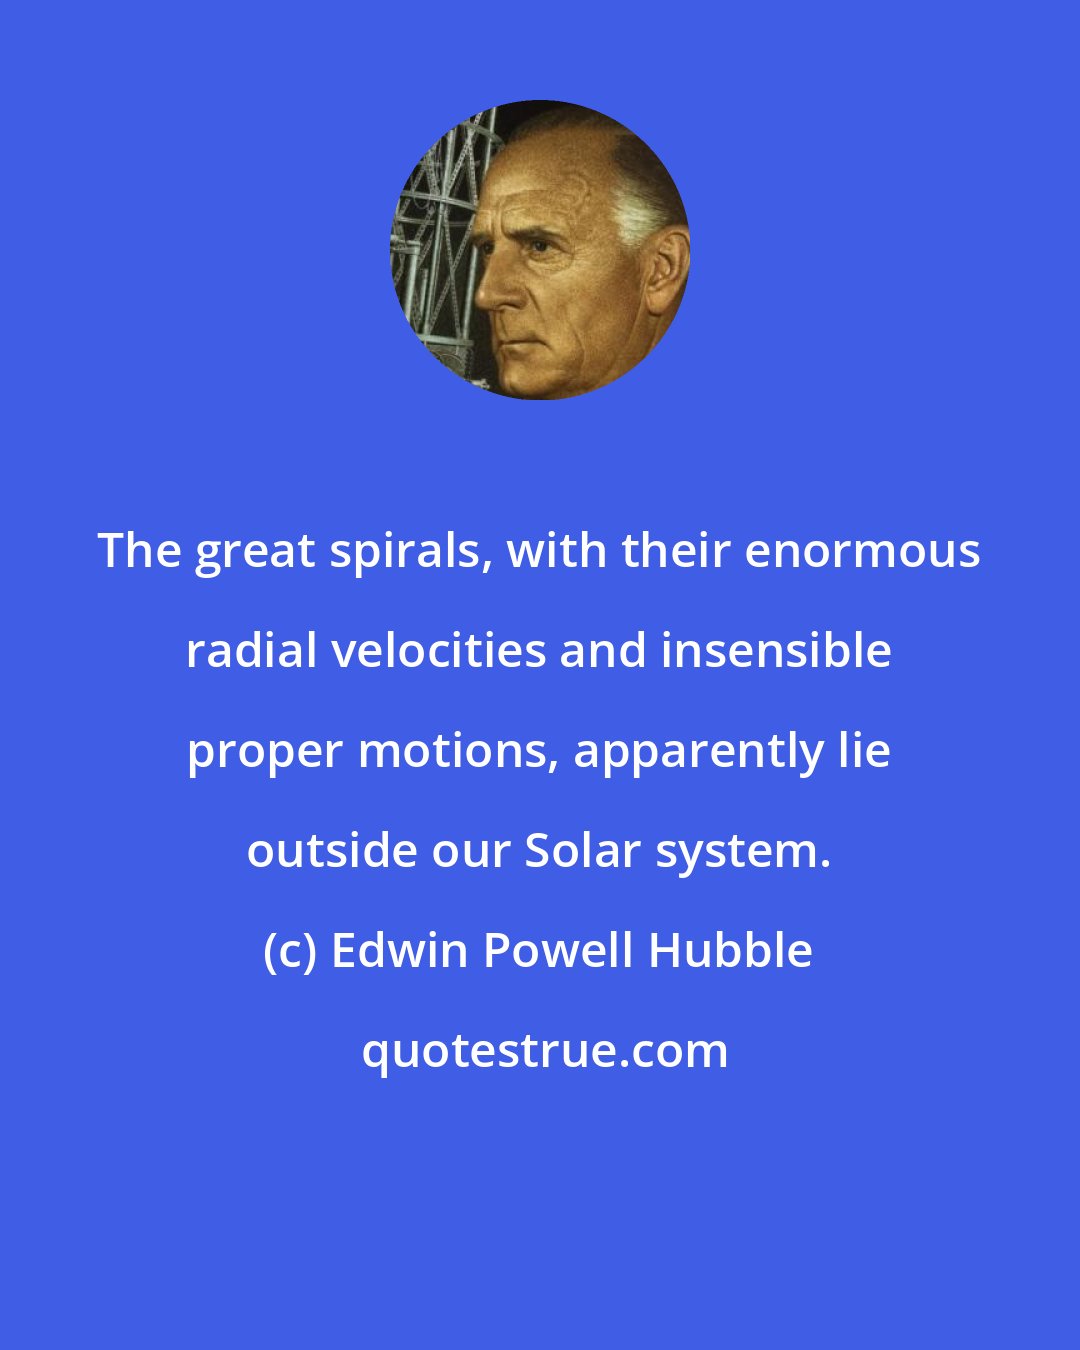 Edwin Powell Hubble: The great spirals, with their enormous radial velocities and insensible proper motions, apparently lie outside our Solar system.